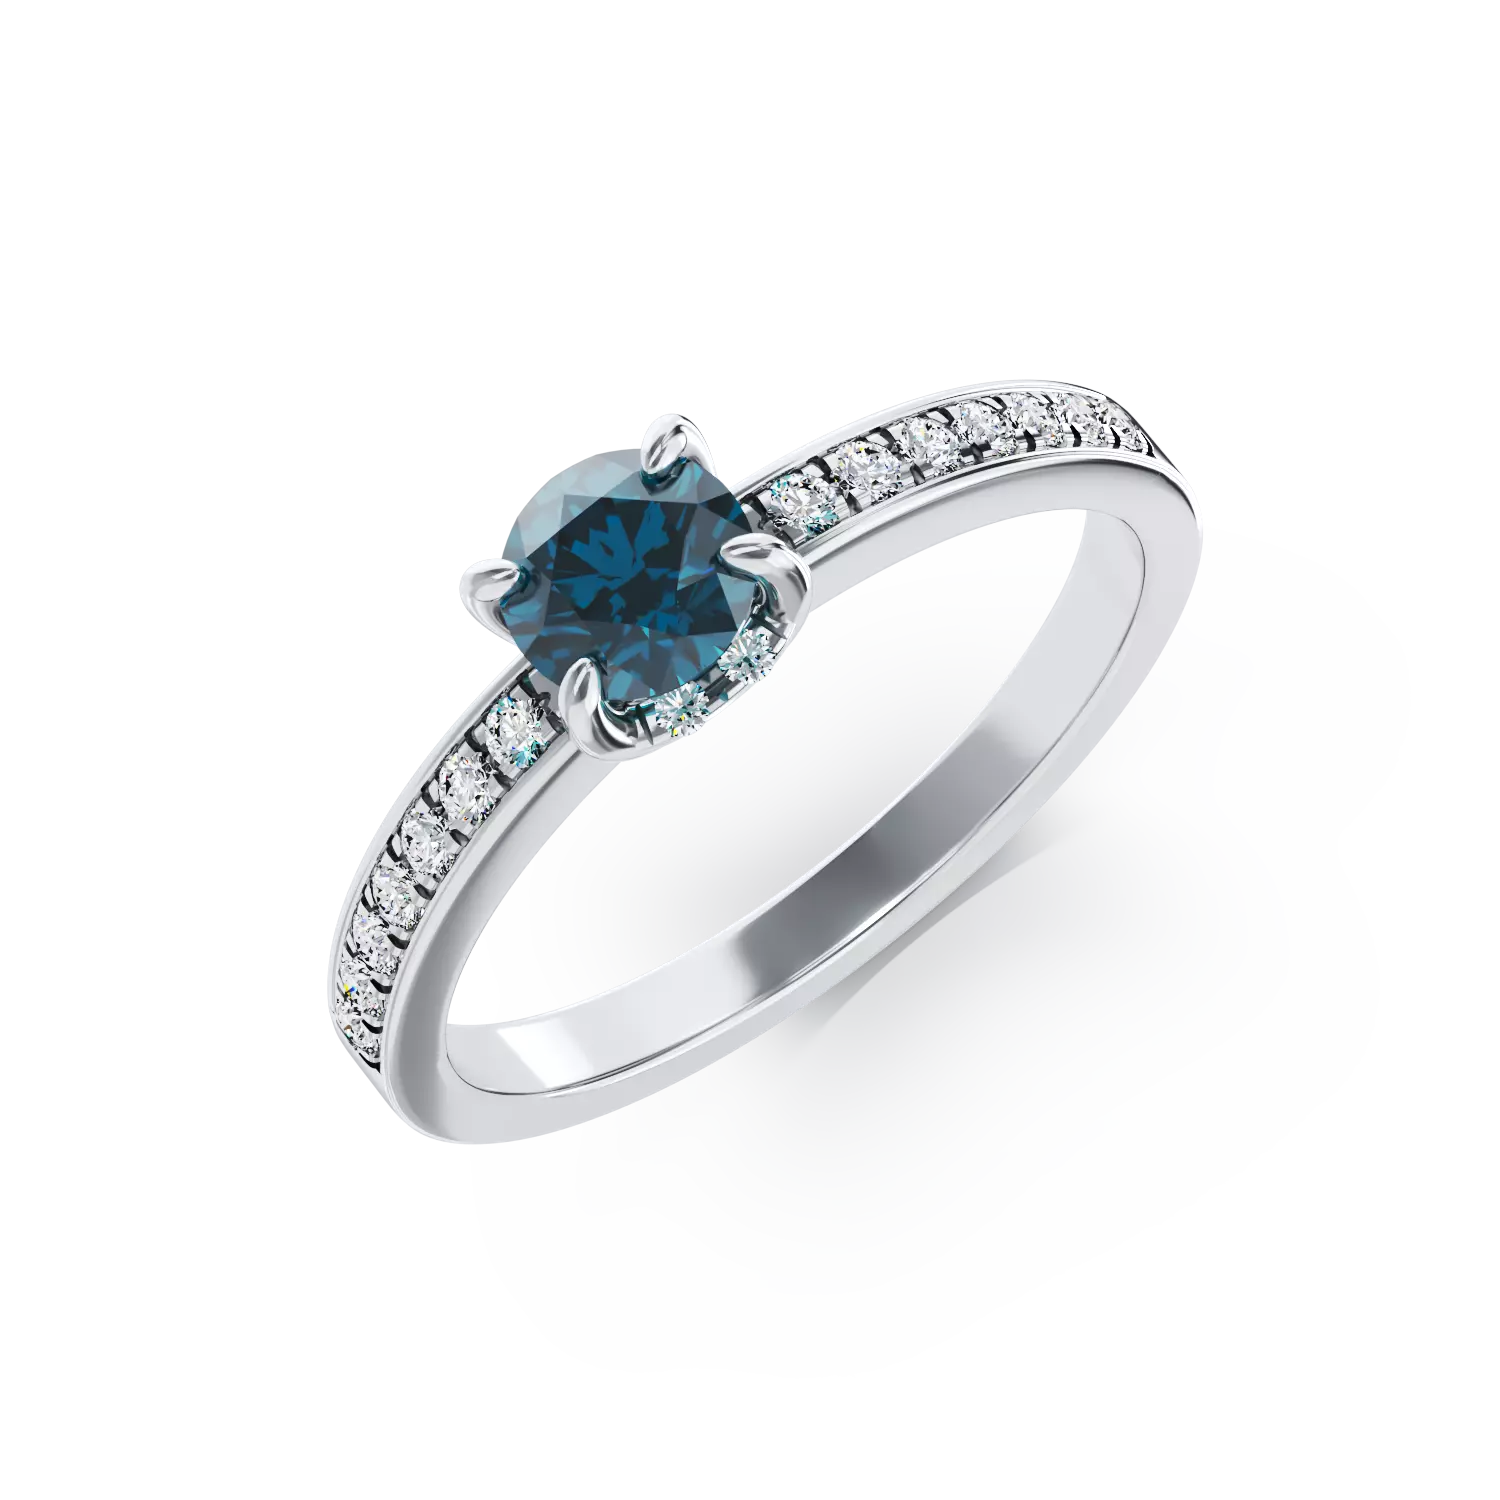 18K white gold engagement ring with 0.44ct blue diamond and 0.2ct diamonds